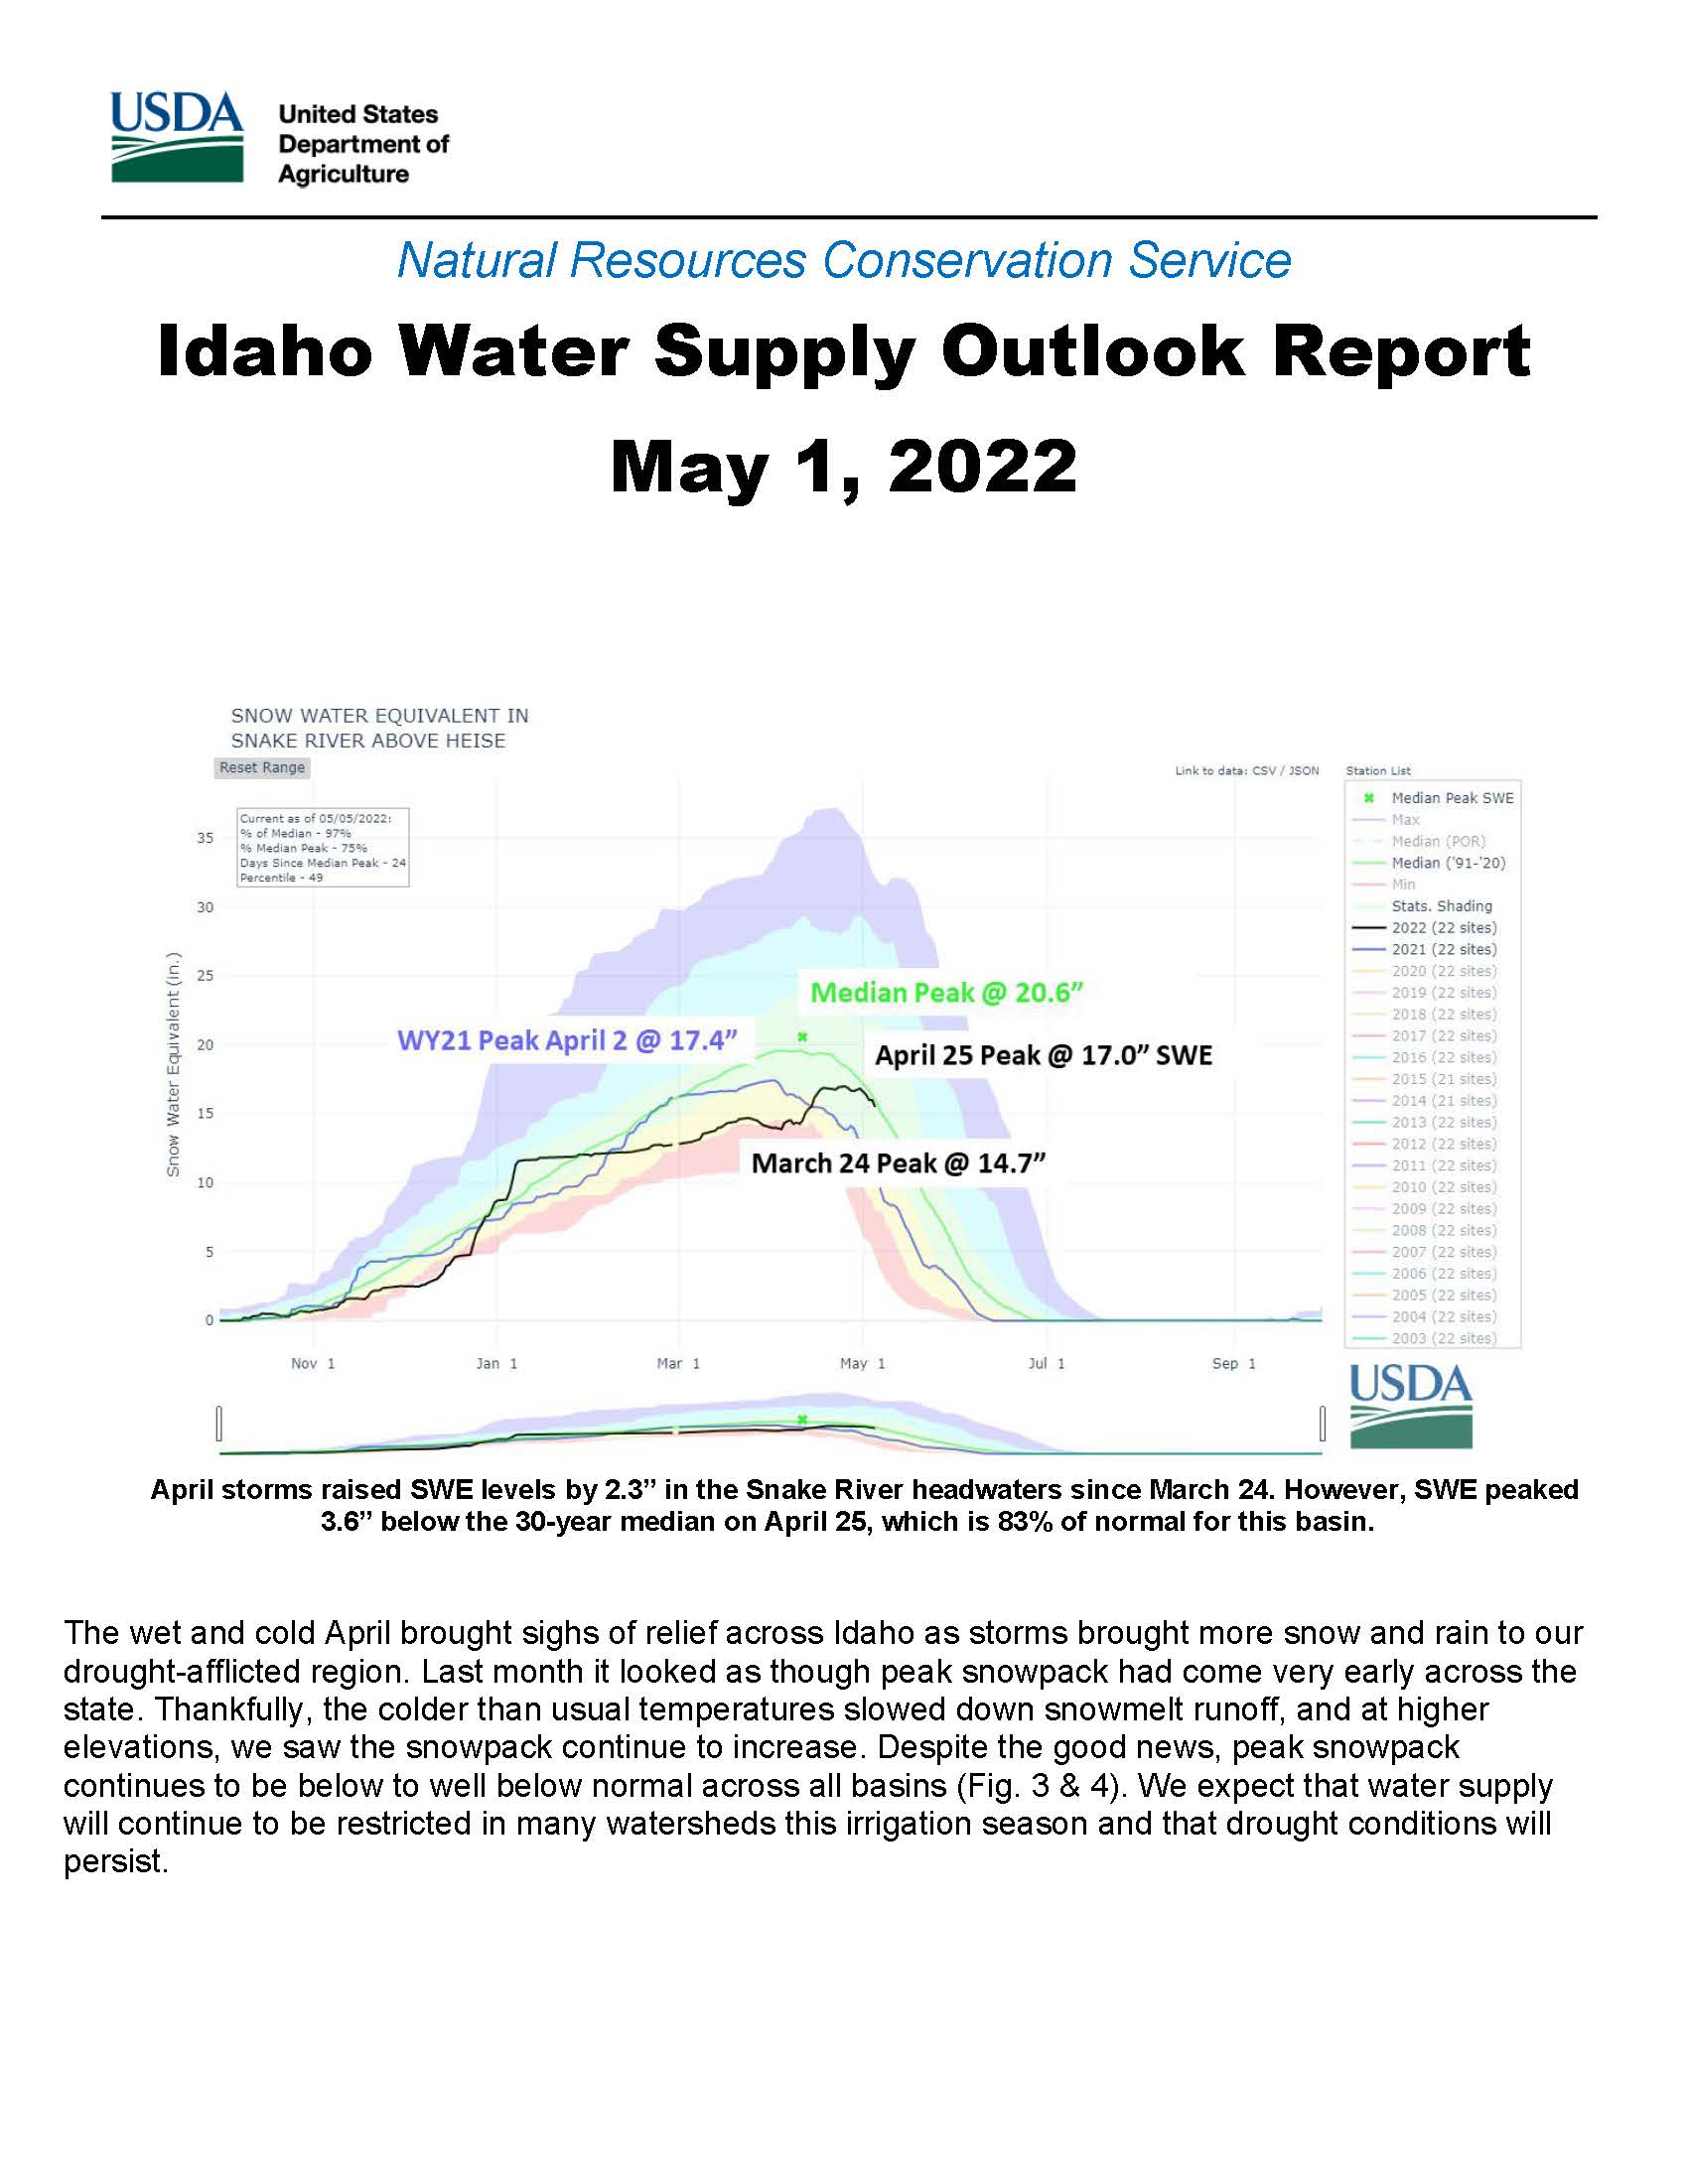 Cover of the May 1, 2022 Water Supply Report